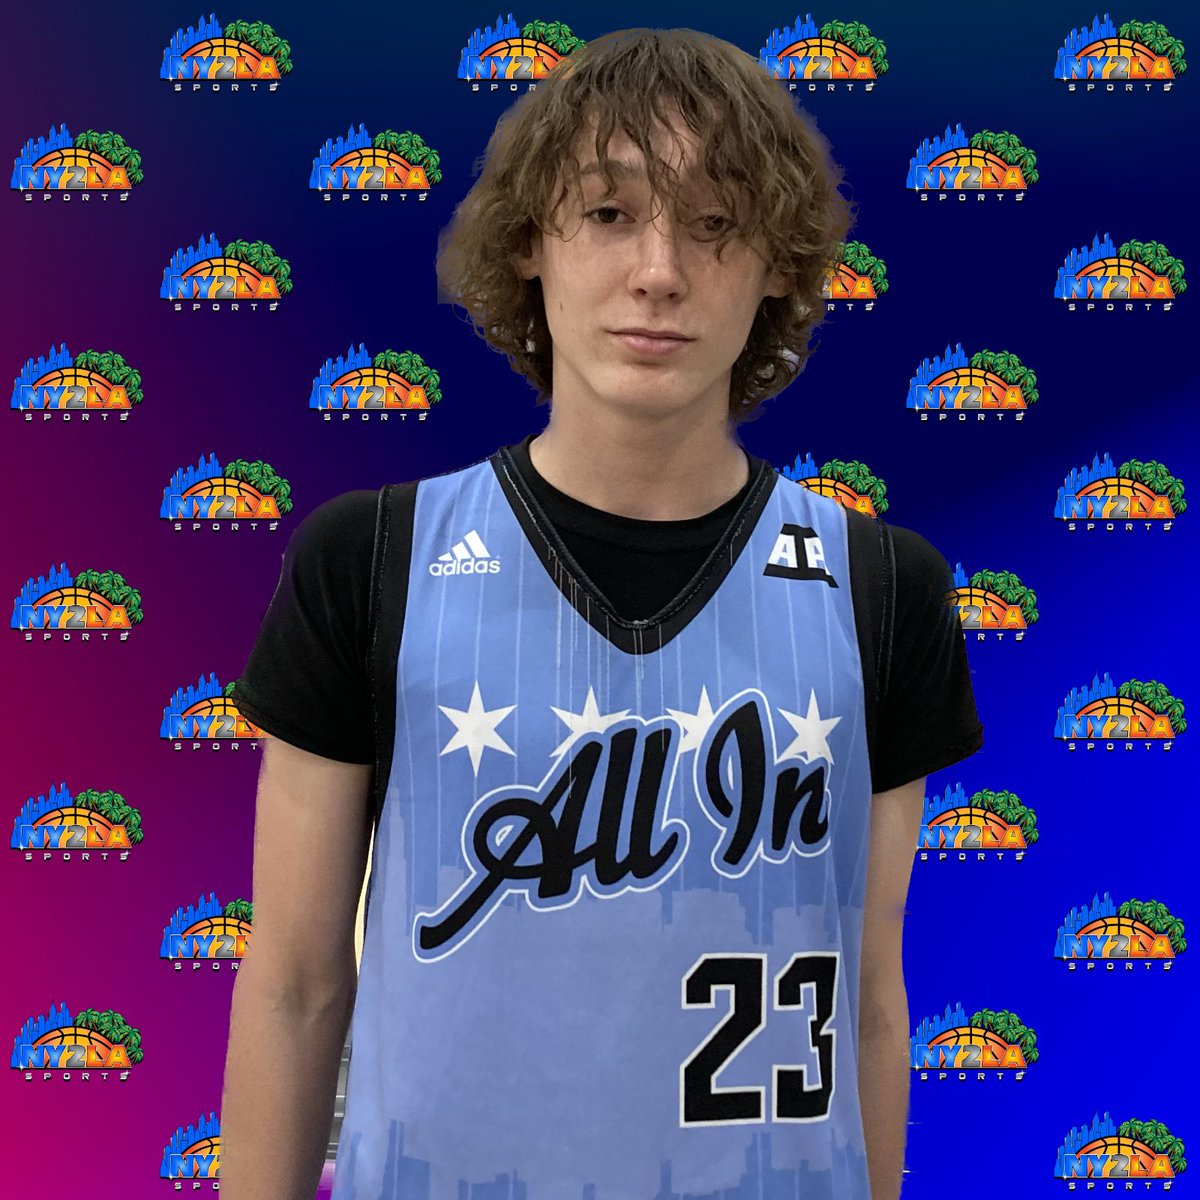 Andre Markov has had a big weekend and ends it with an impressive 11 point win against one of the top teams here. The versatile and energetic wing is such a high impact player including scoring 13 points. @AIAeliteboys @ny2lasports @GNBABASKETBALL